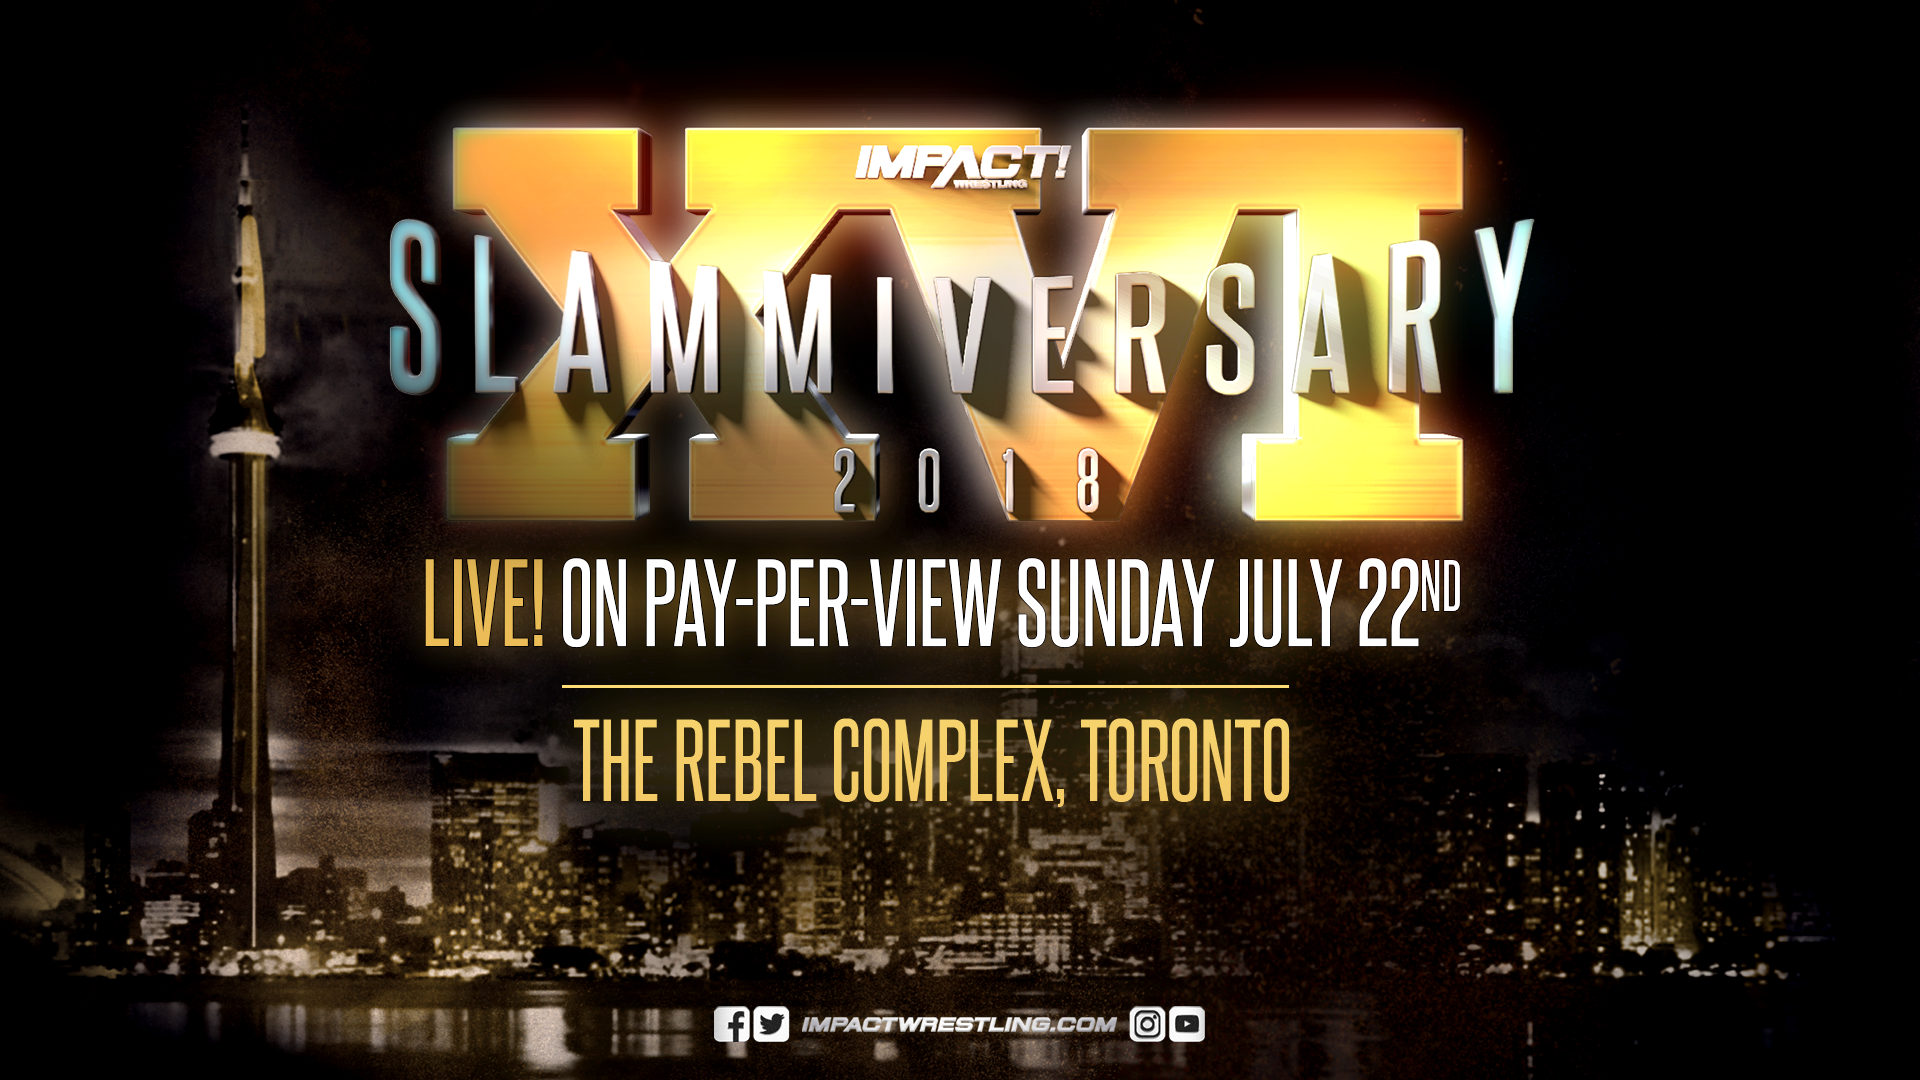 Chris Jericho Praises Wild Slammiversary Match, New X-Division Champ Reacts To His Title Win